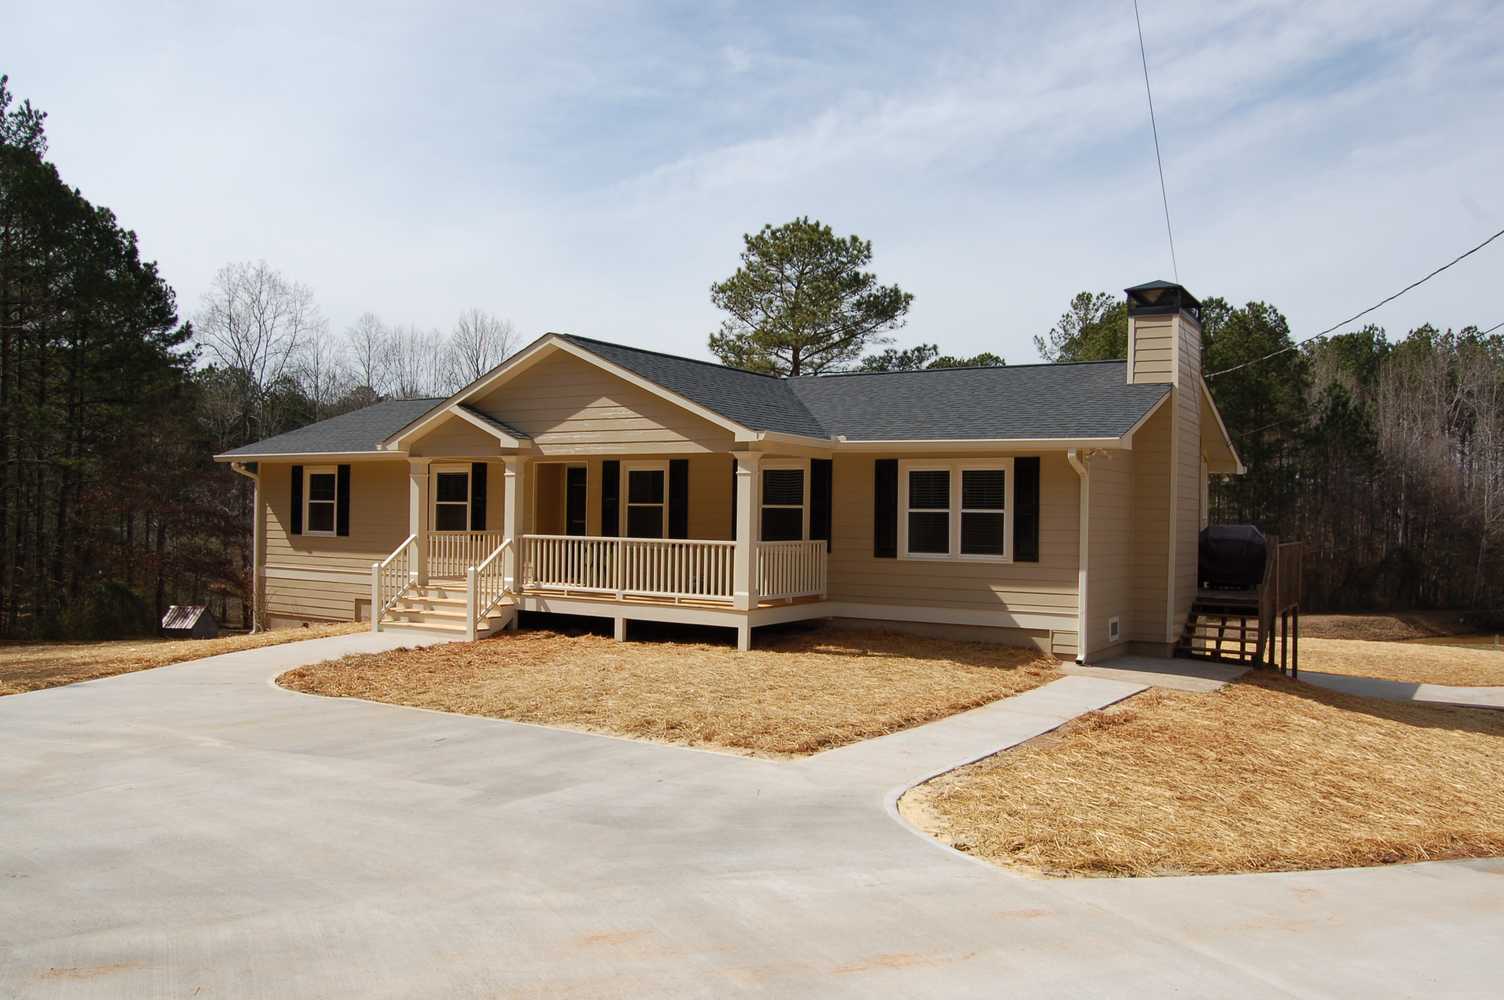 Fowler Homes Inc Garage addition and House Remodeling project.